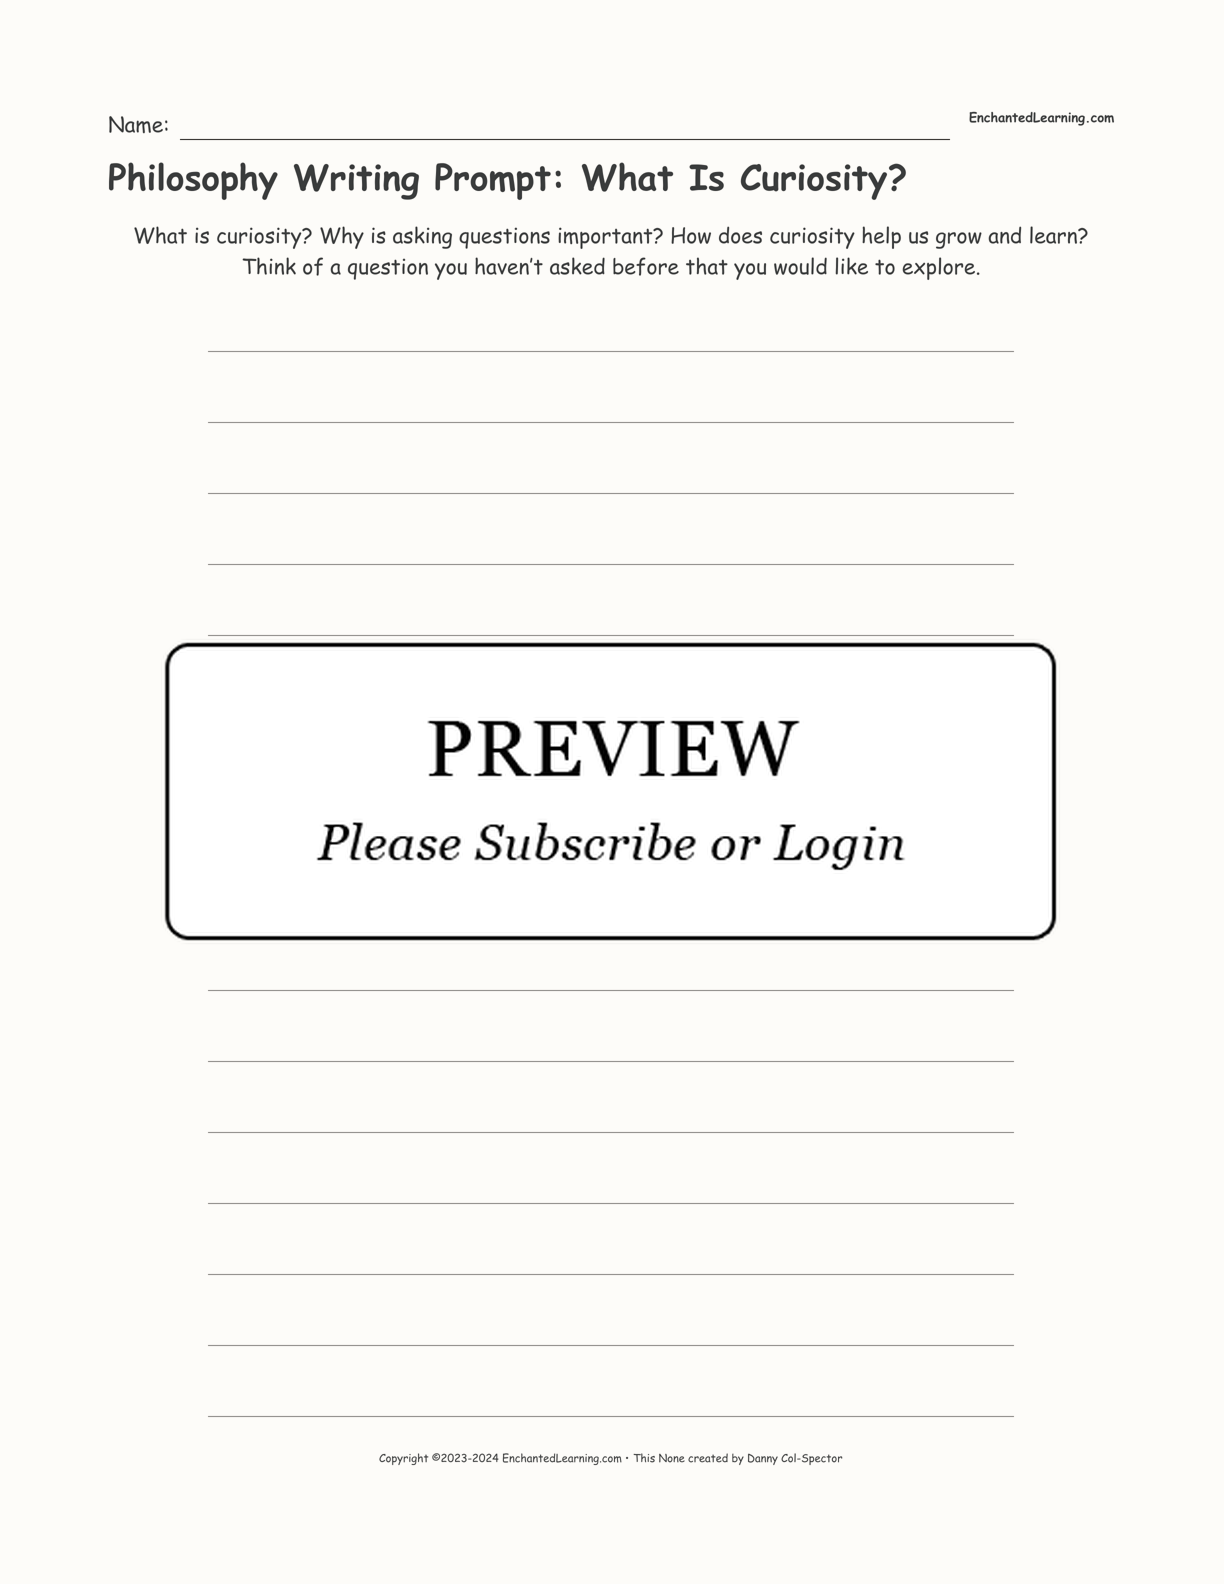 Philosophy Writing Prompt: What Is Curiosity? interactive printout page 1